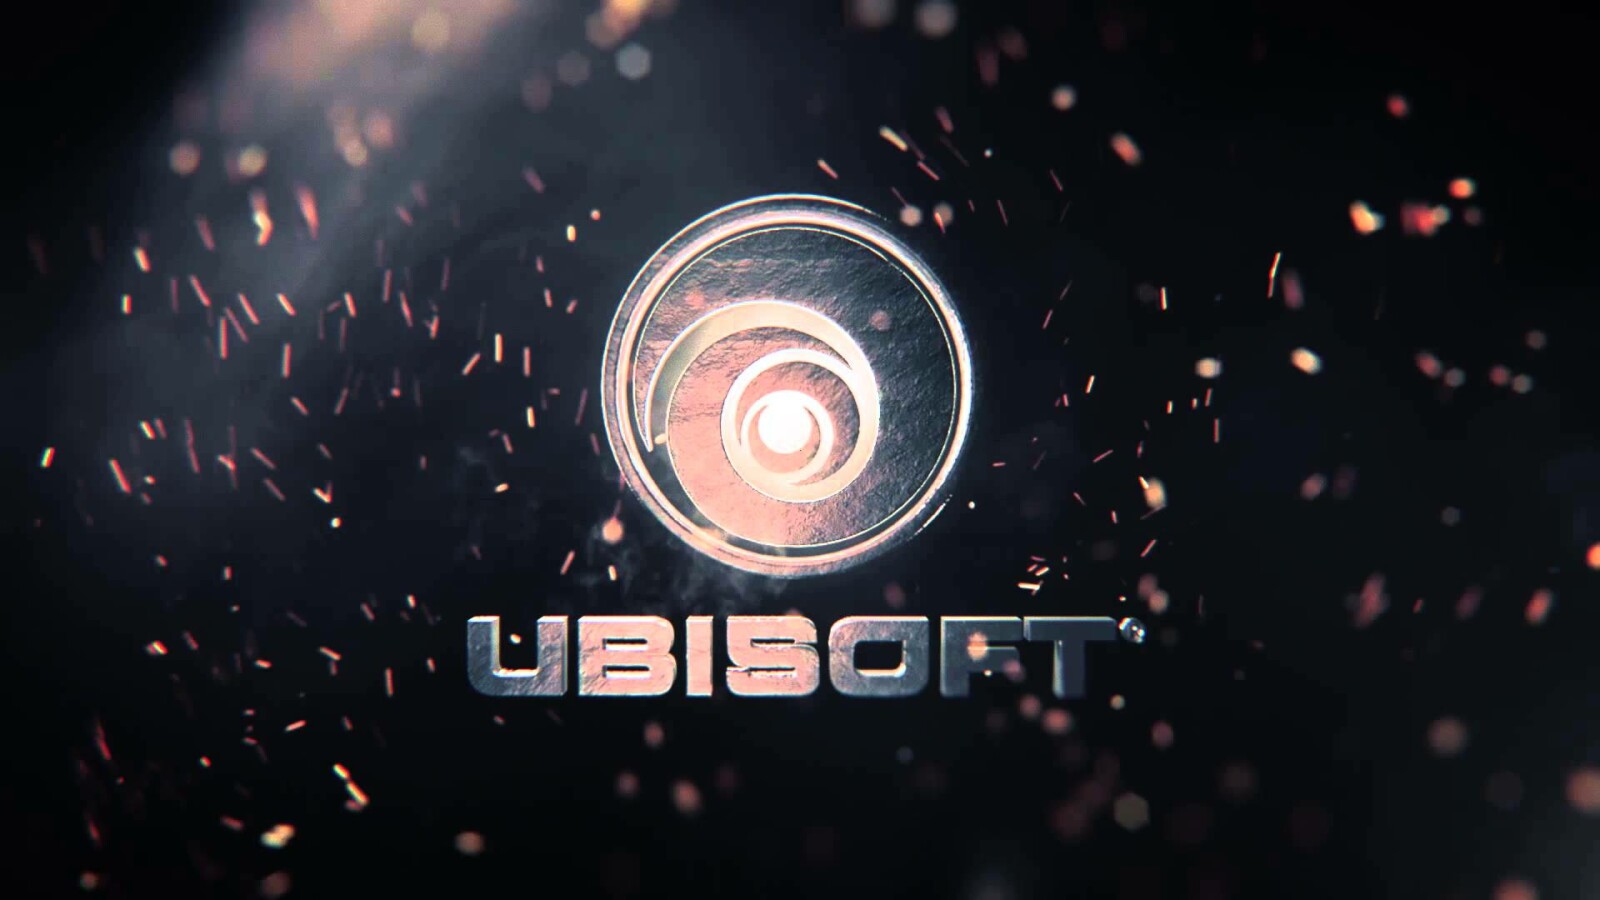 Free Games From Ubisoft Great Gifts For Pcs And Consoles Igamesnews